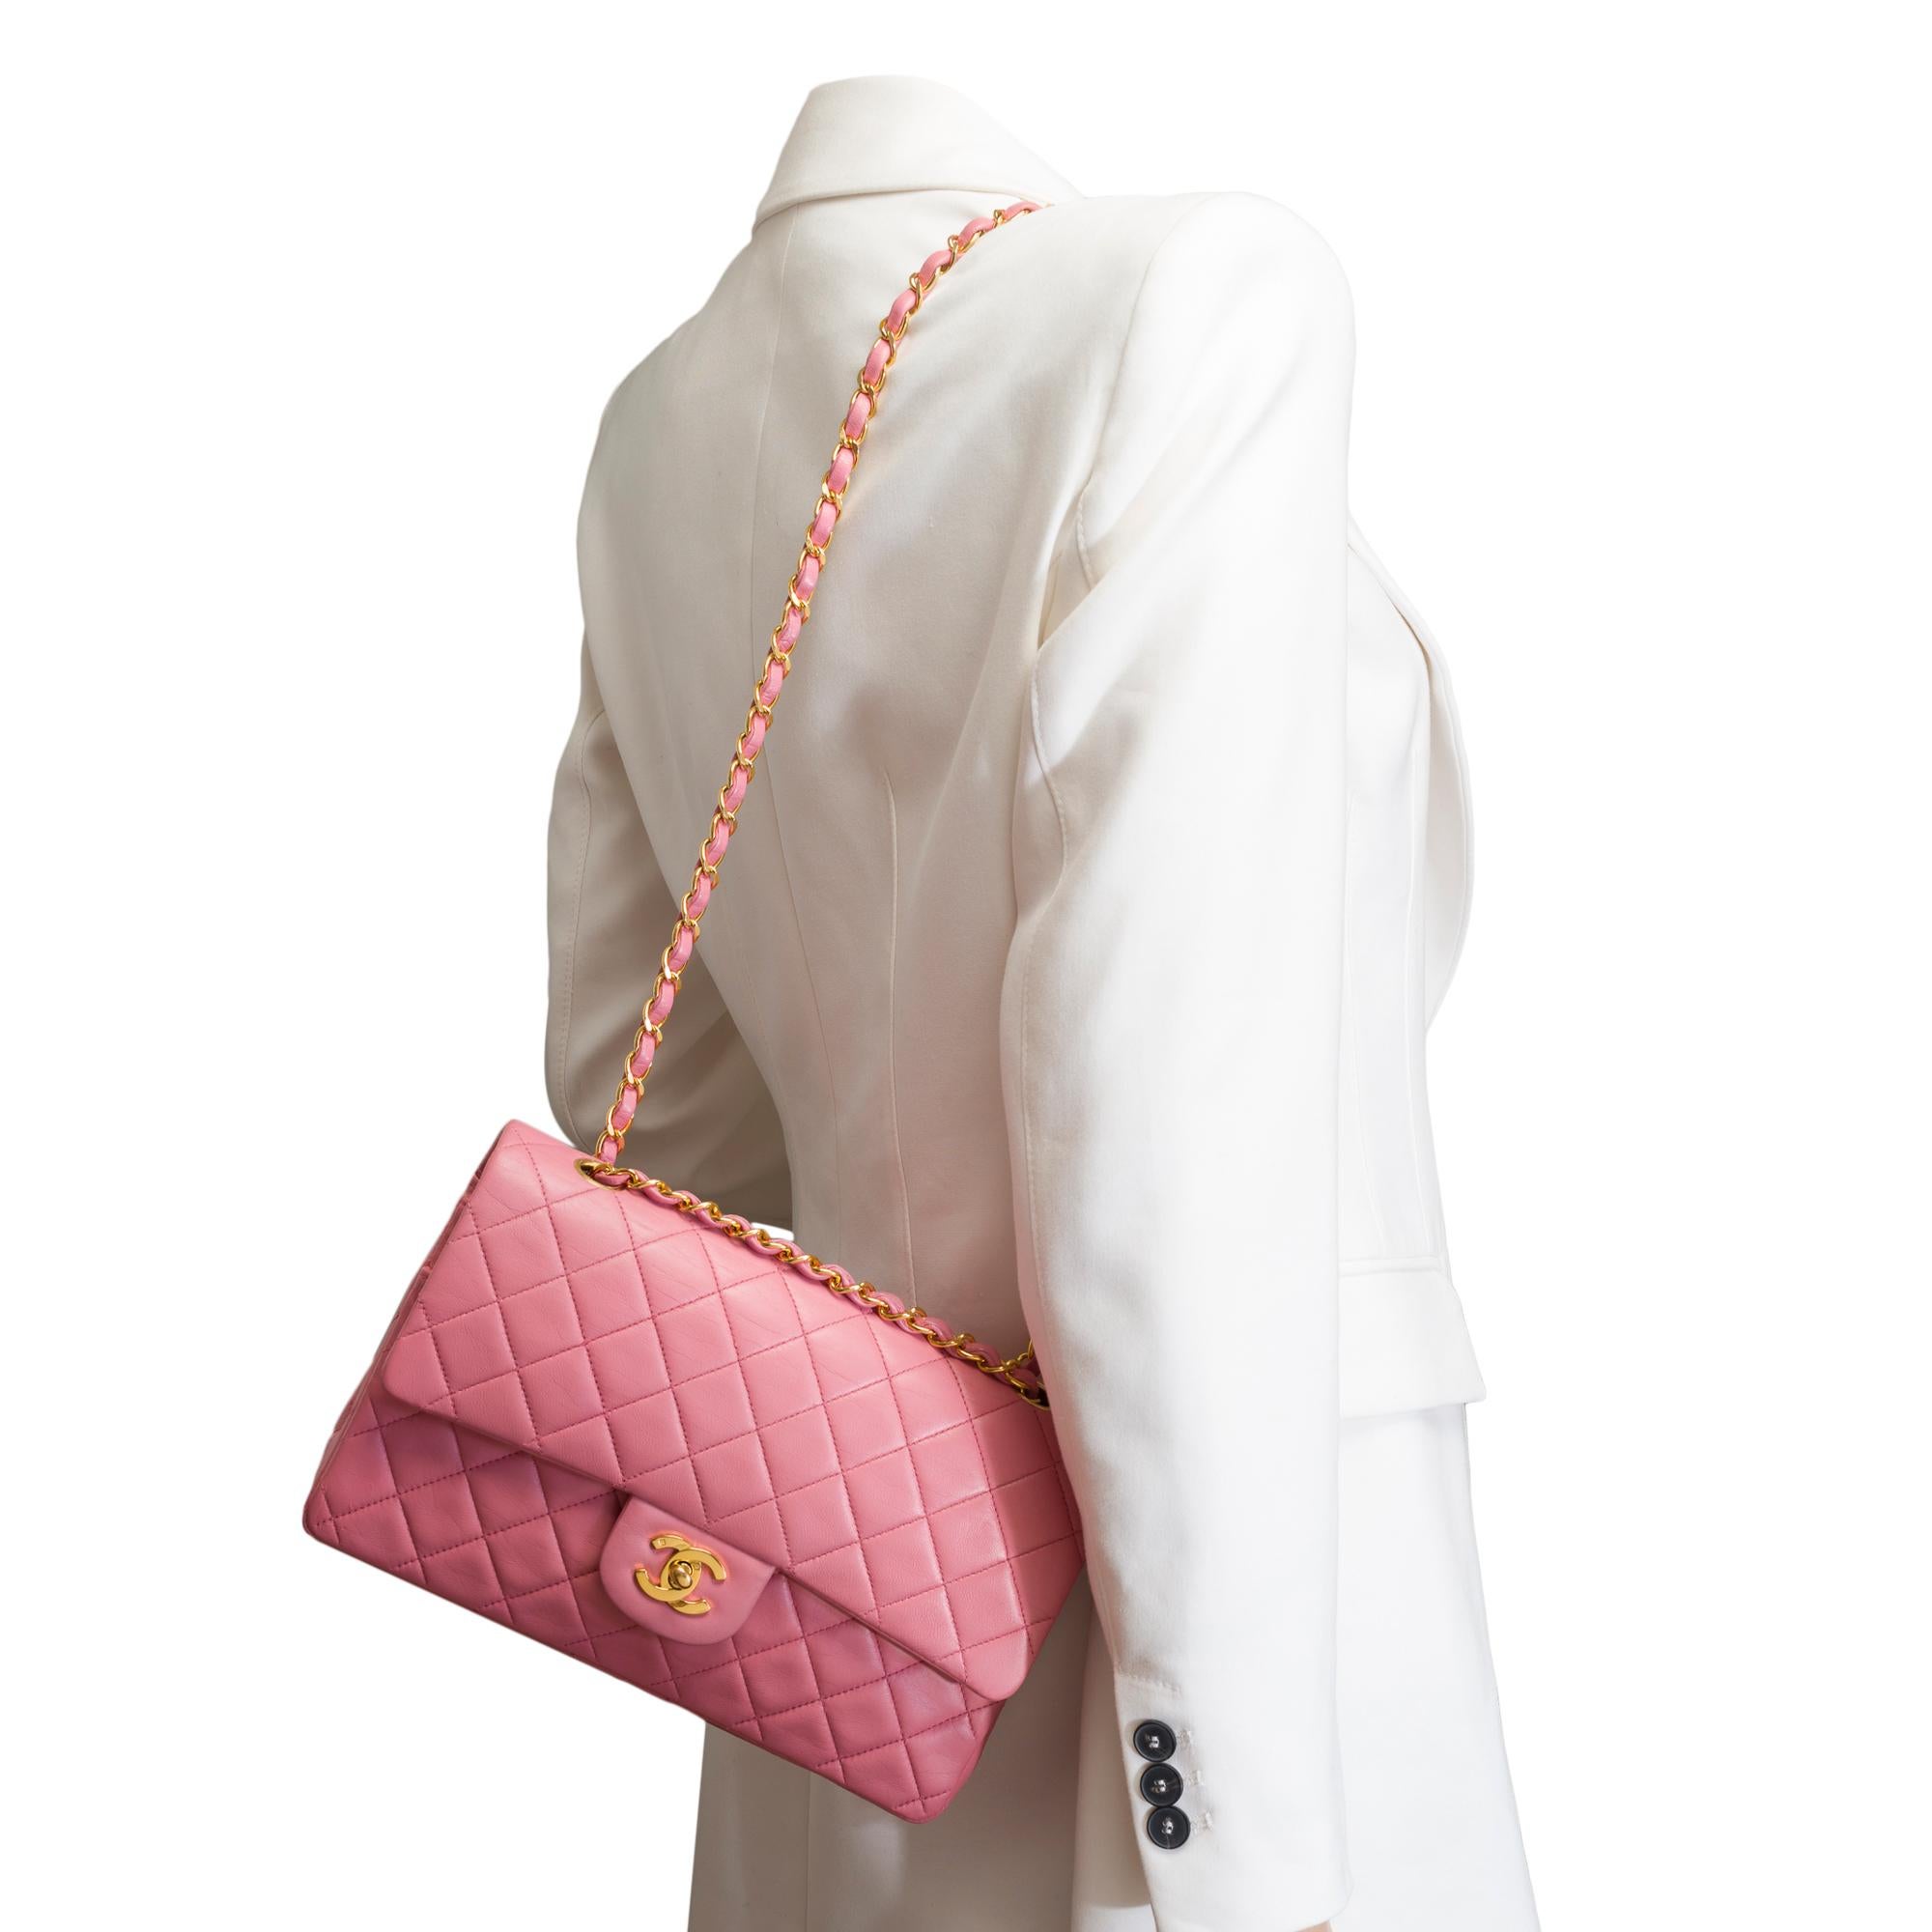 Chanel Timeless Medium double Flap shoulder bag in Pink quilted lambskin, GHW 10